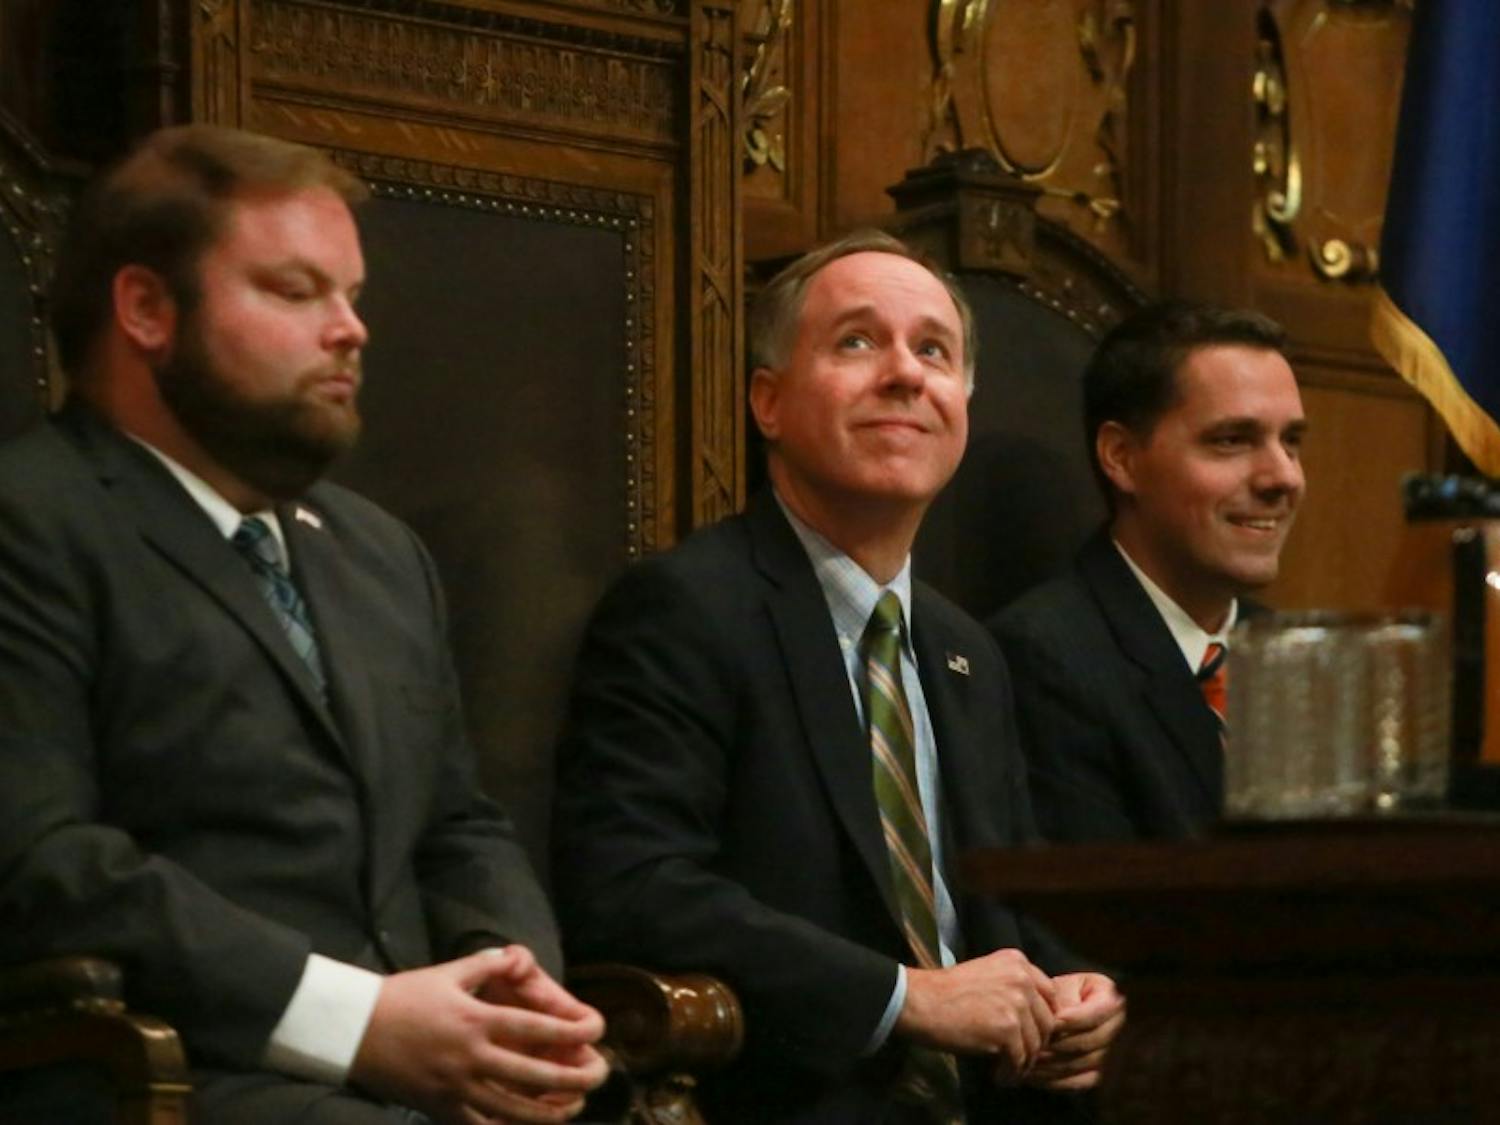 Assembly Speaker Robin Vos announced a new commission to begin evaluation of existing education funding system.